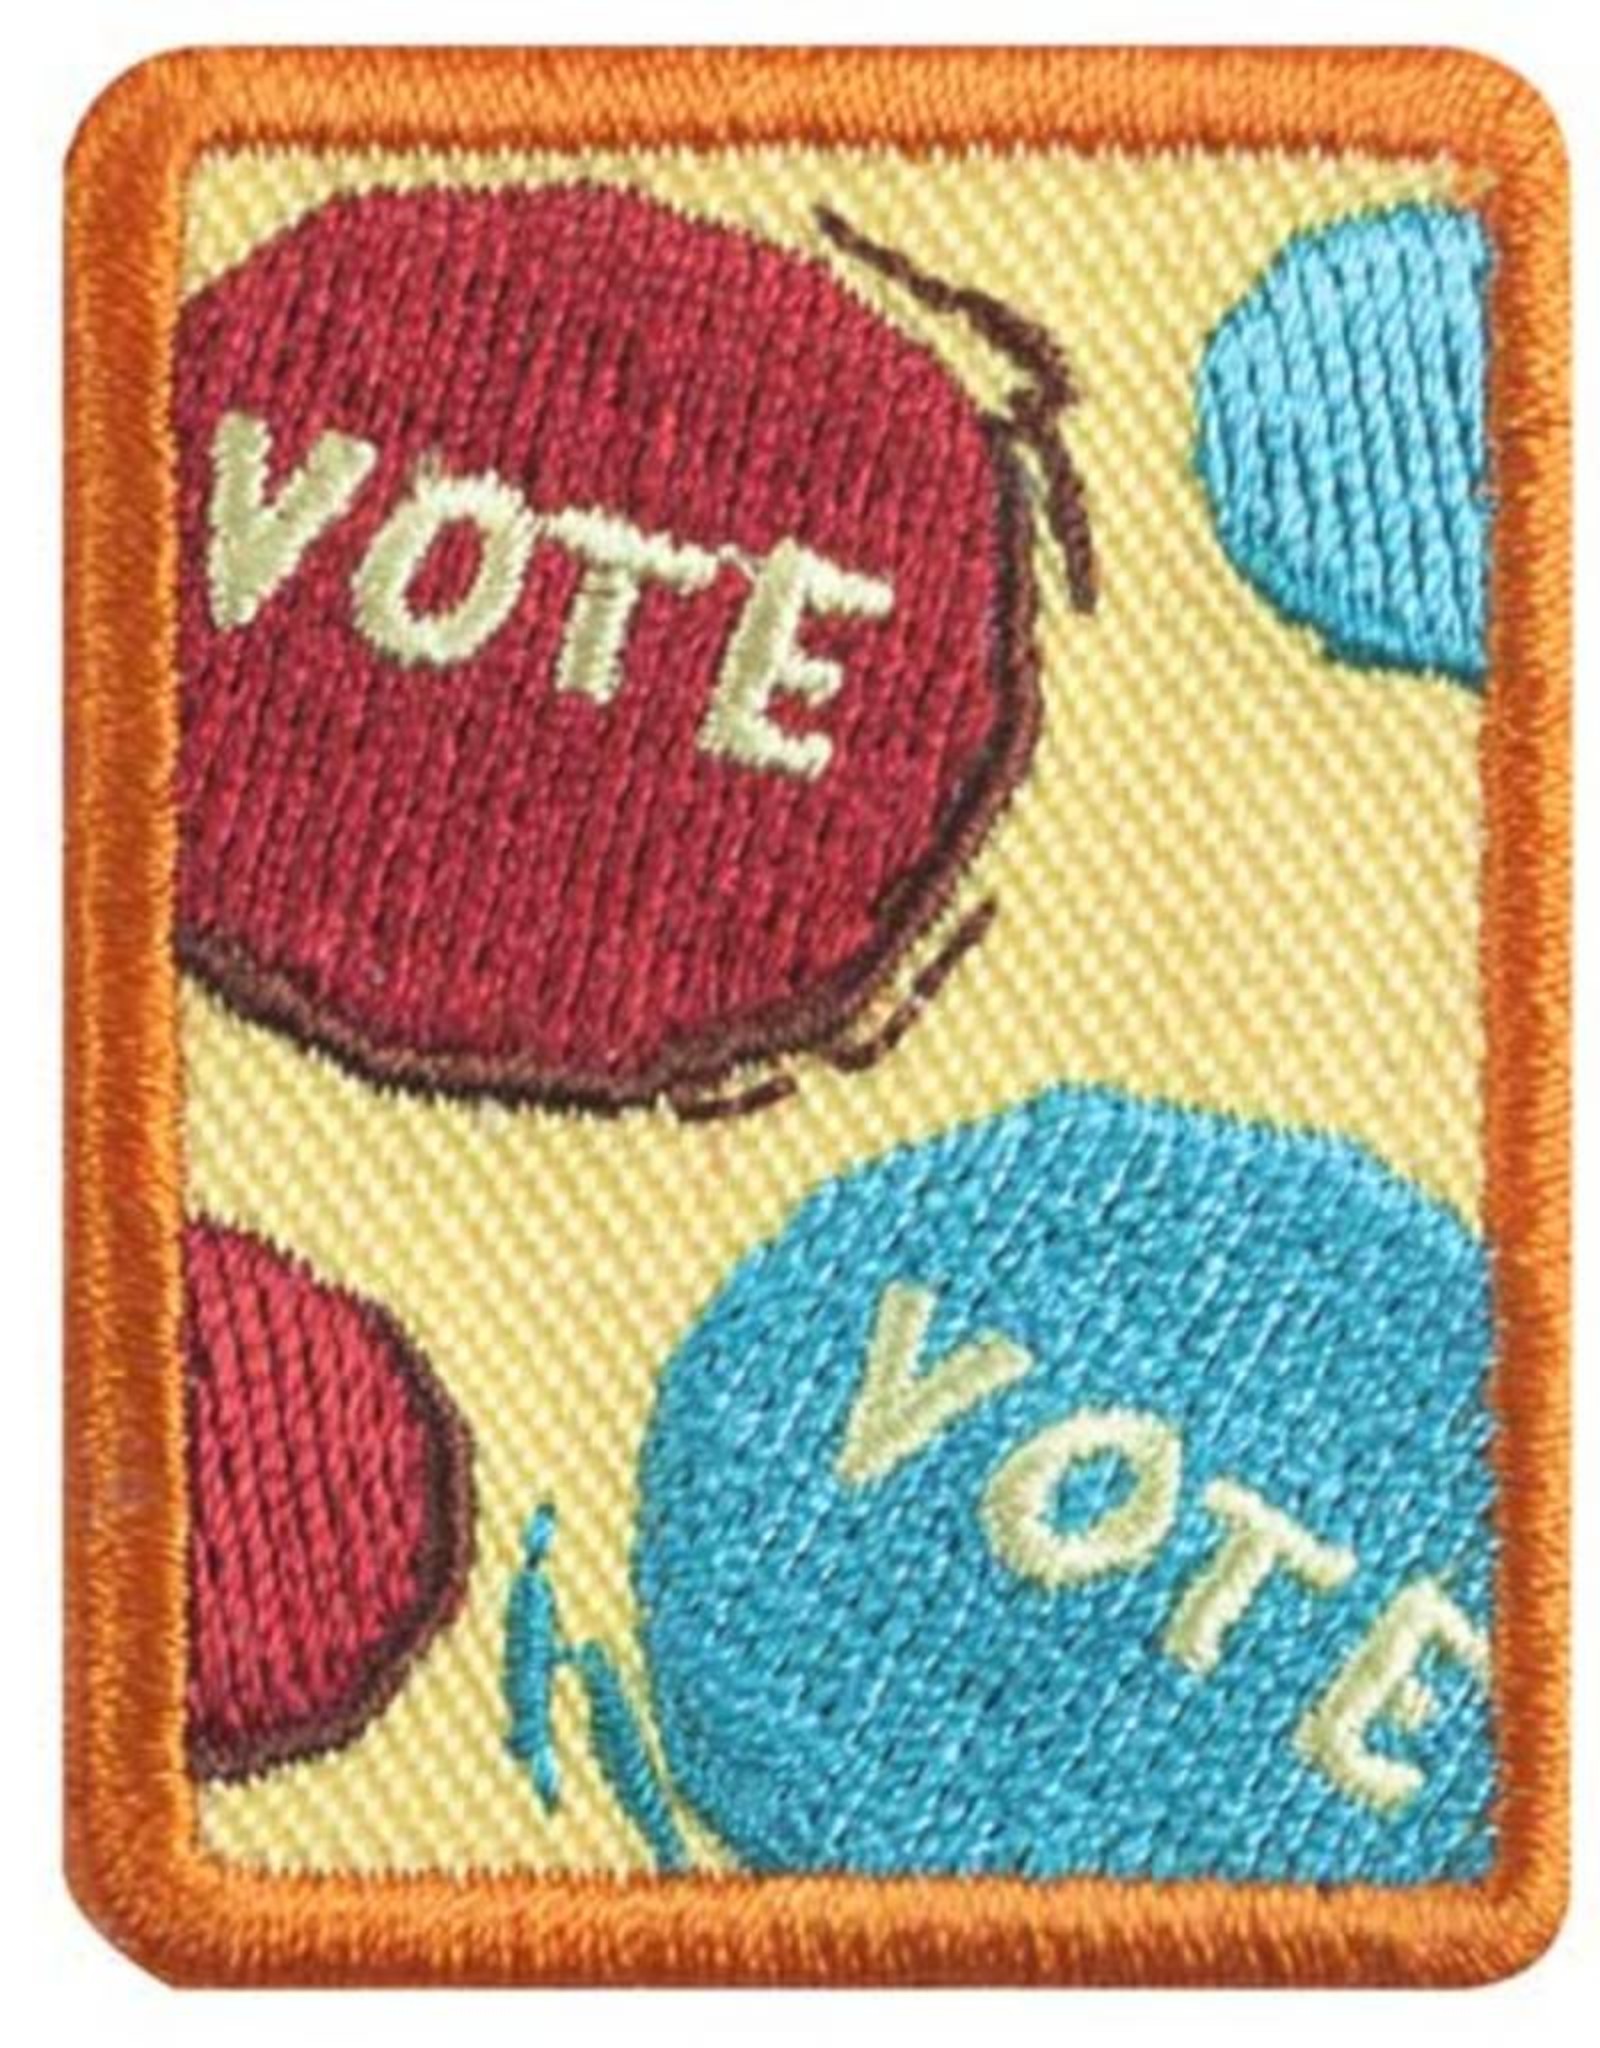 GIRL SCOUTS OF THE USA Senior Behind the Ballot Badge